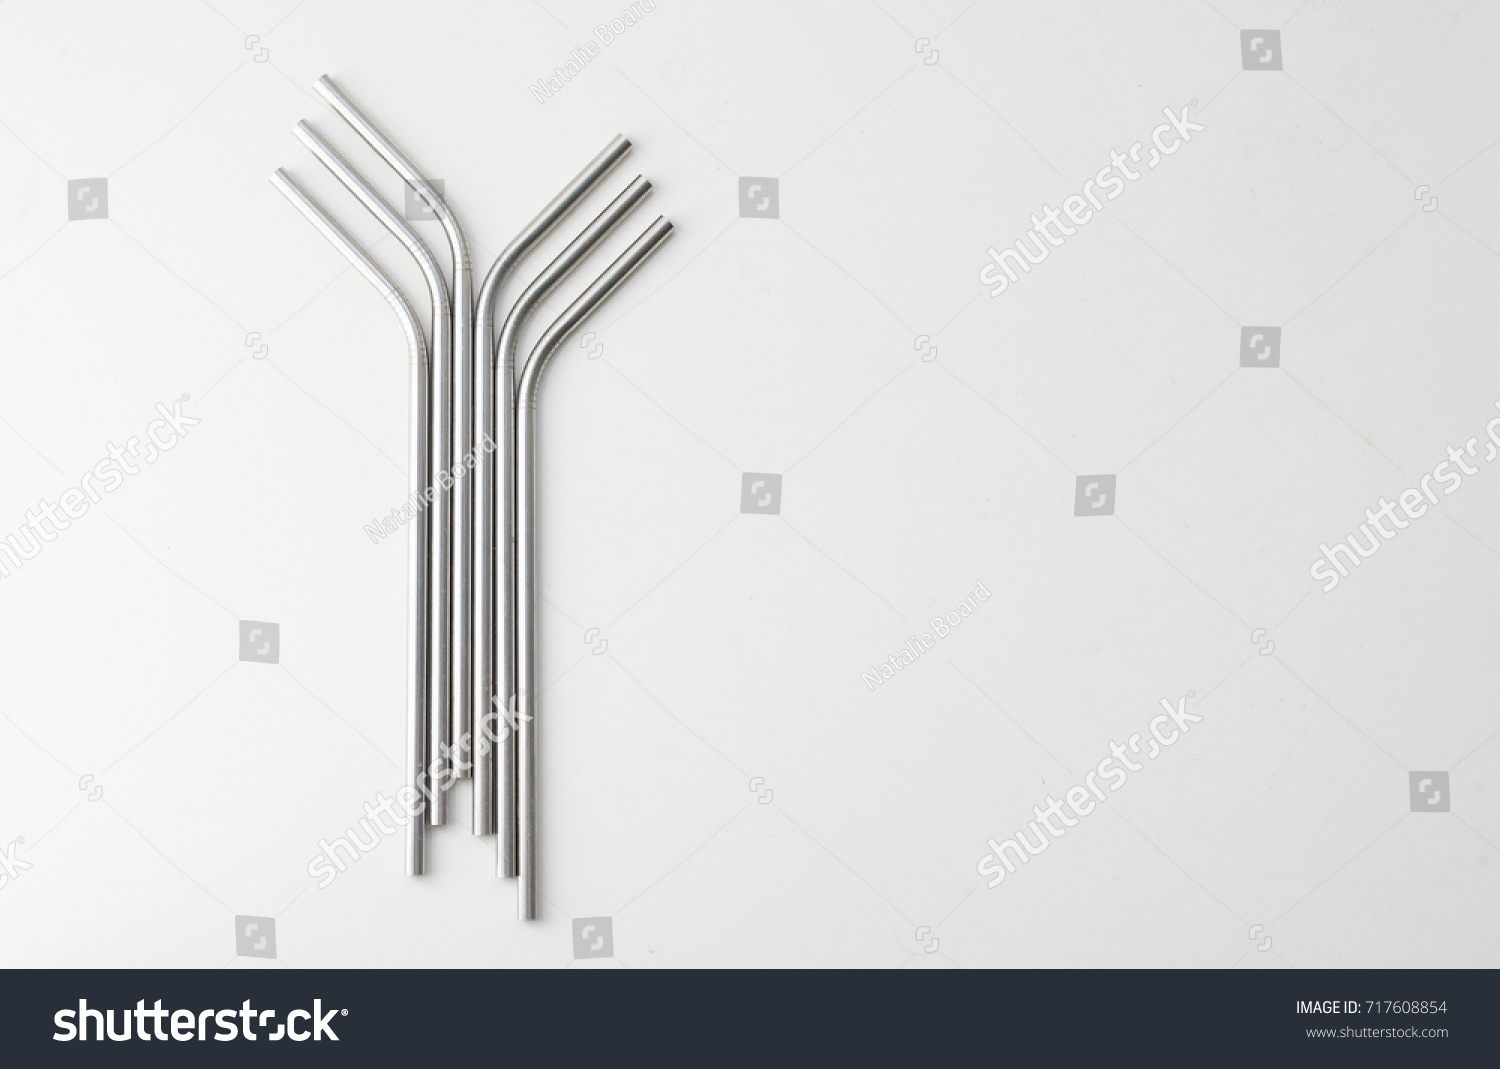 High angle view of six metal drinking straws arranged on white background #717608854